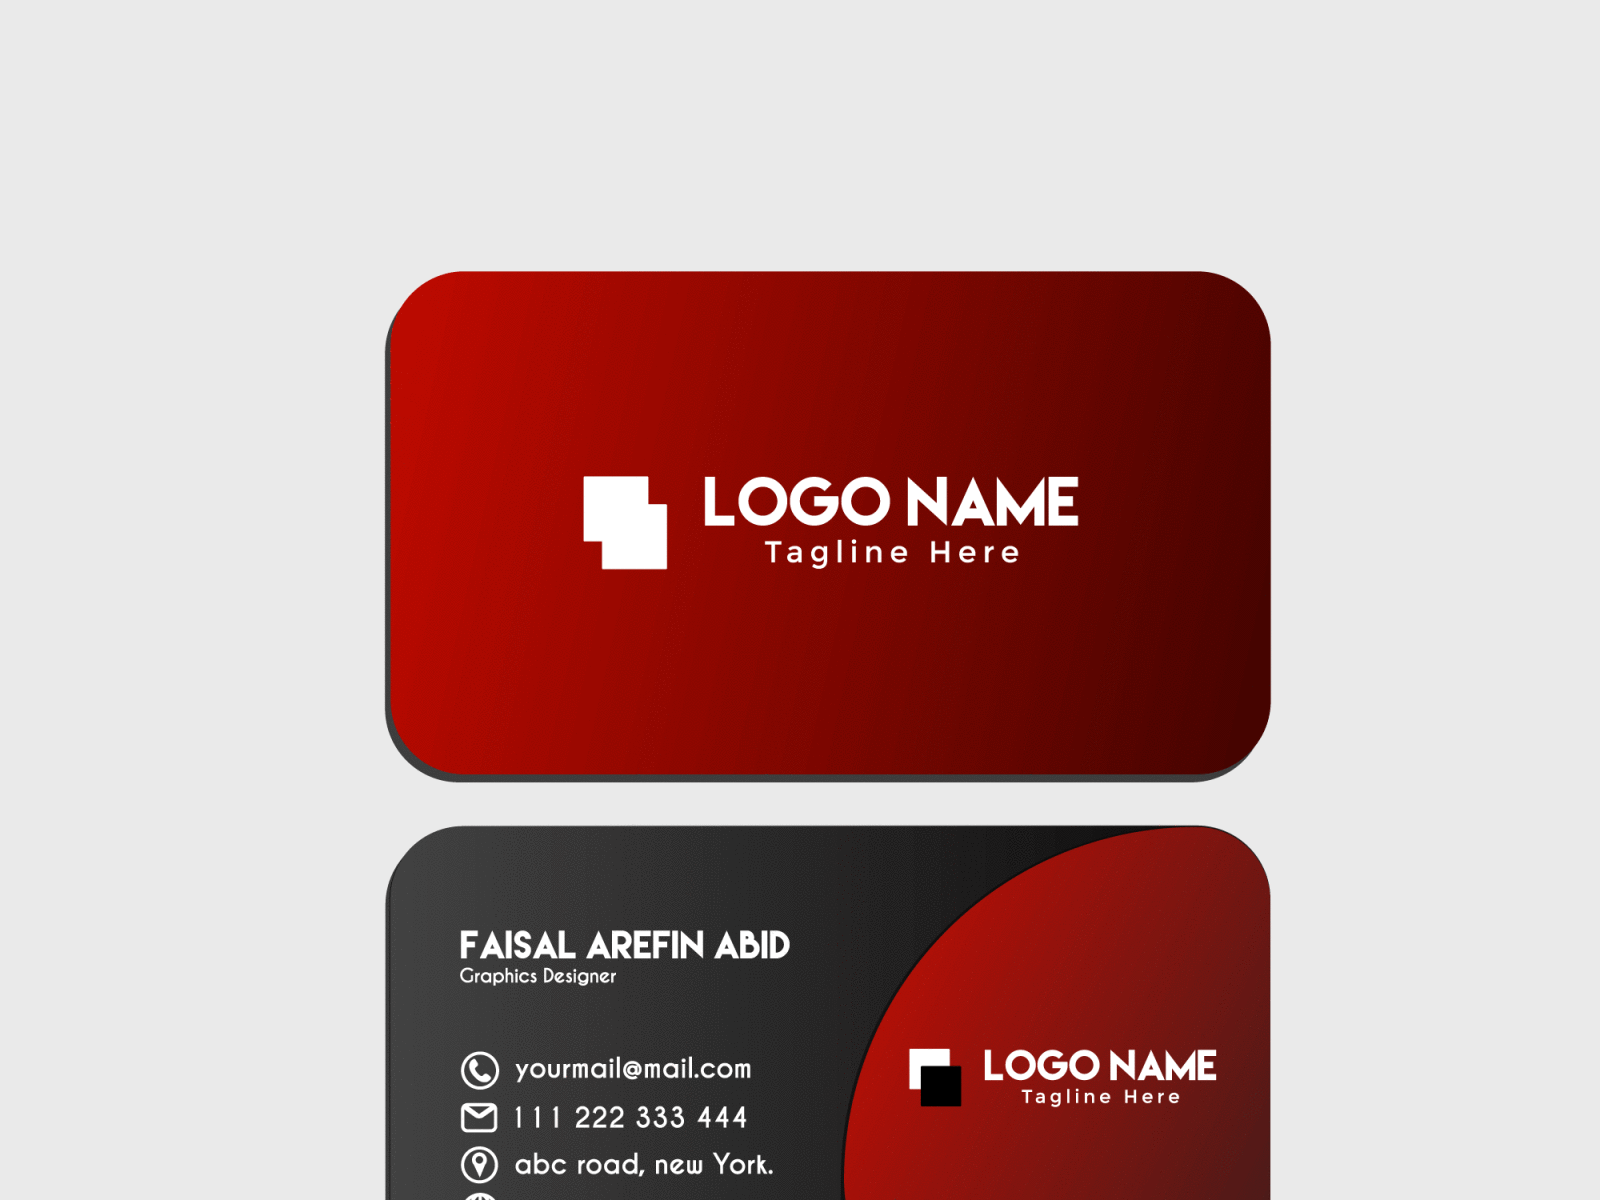 business card design images brand identity business card design card card design company logo grapicsdesign